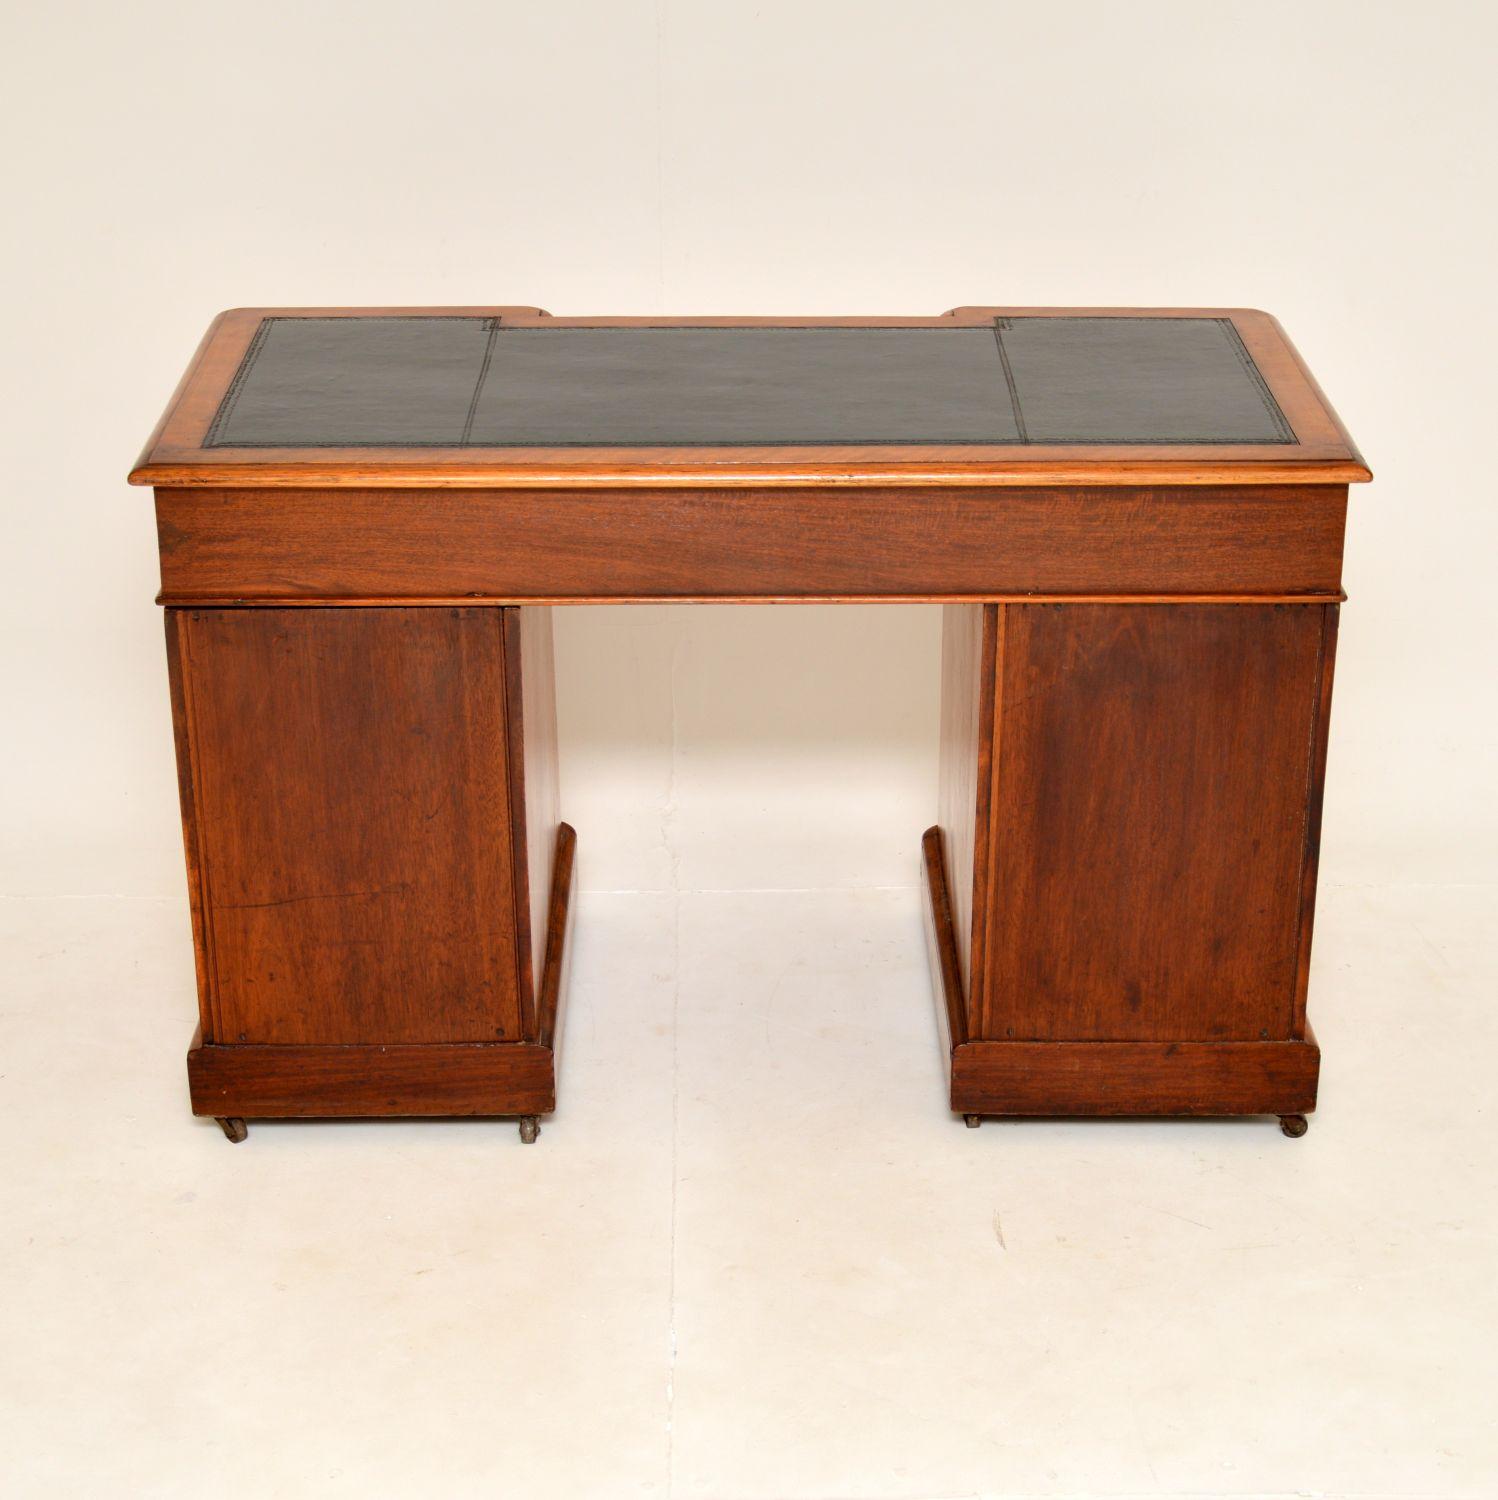 Antique Victorian Satin Wood Leather Top Pedestal Desk In Good Condition For Sale In London, GB